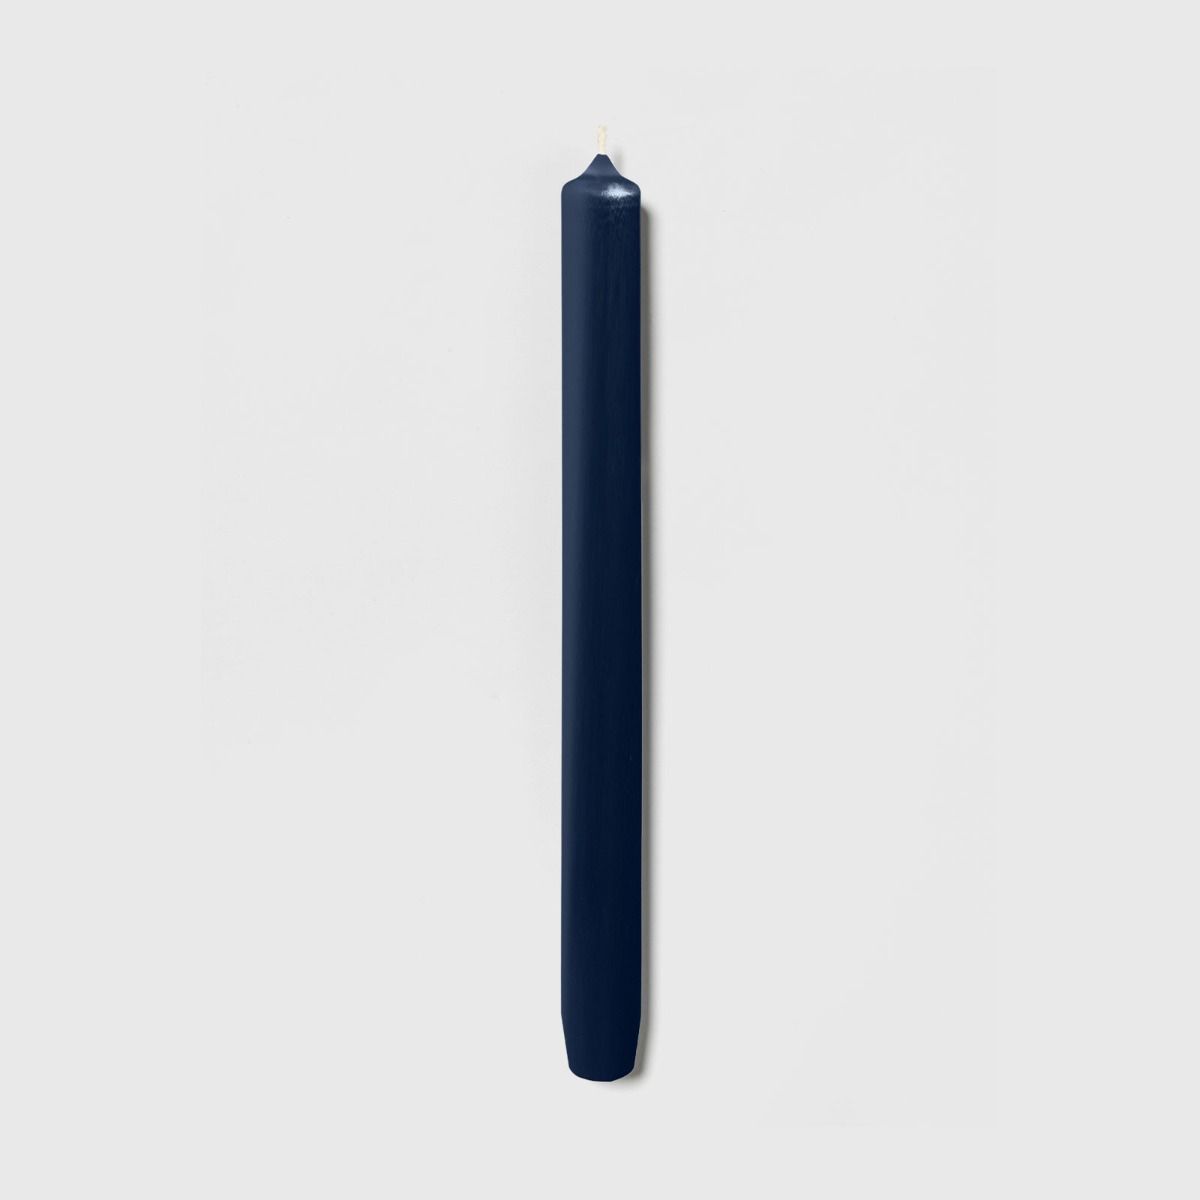 Trudon Royale Taper Candle Navy Blue. Box of 6.